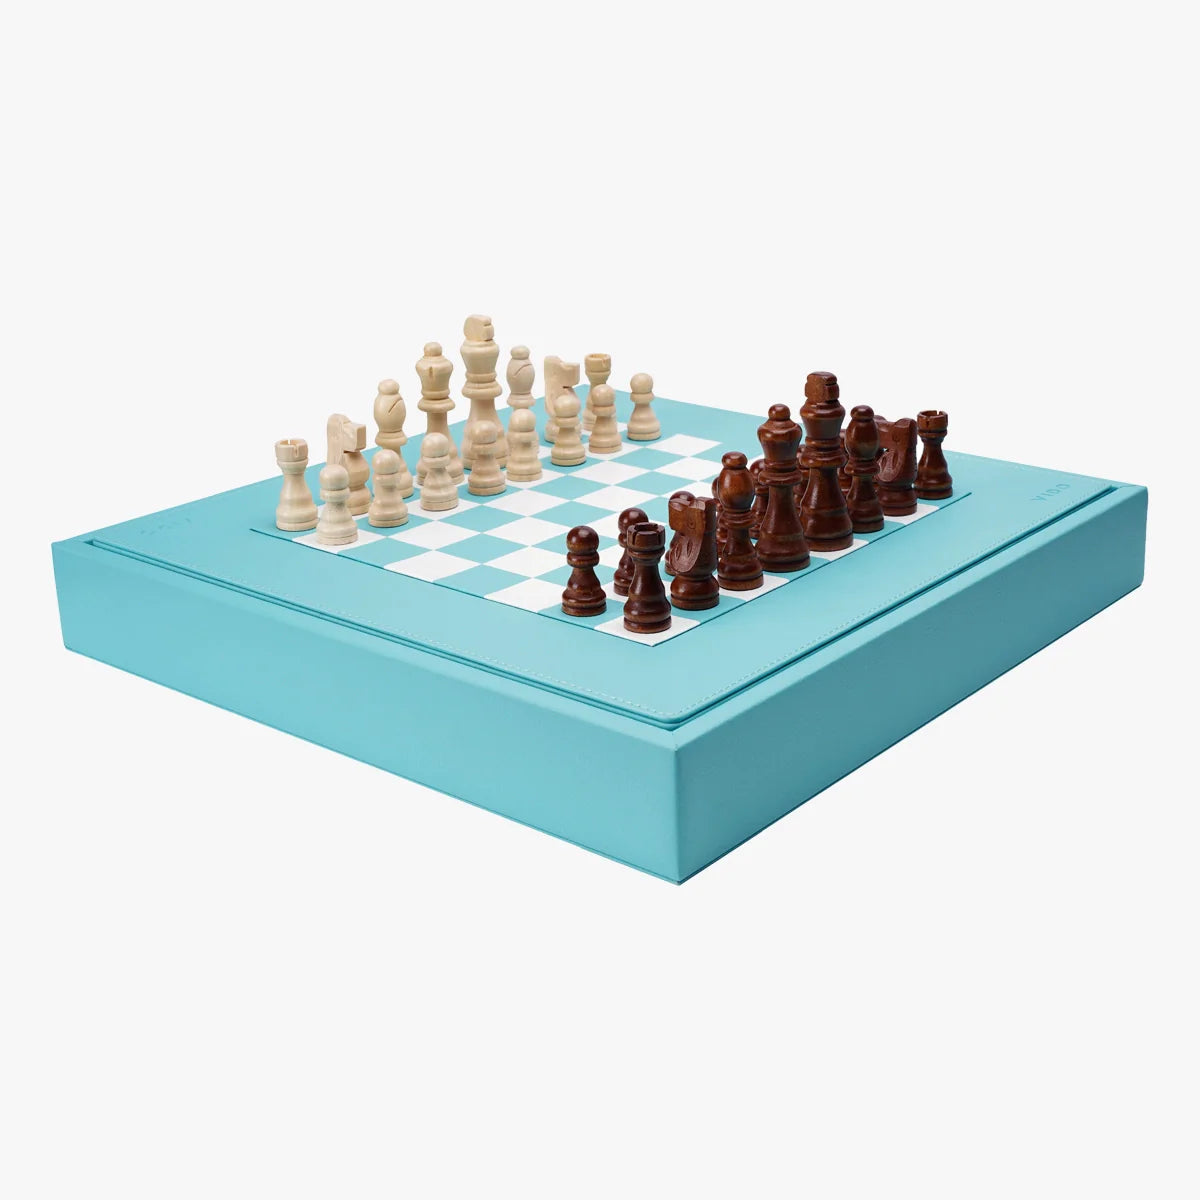 NEW OTHER 15 INCH MAGNETIC CHESS BOARD WOOD LOOK OPEN BOX ITEM